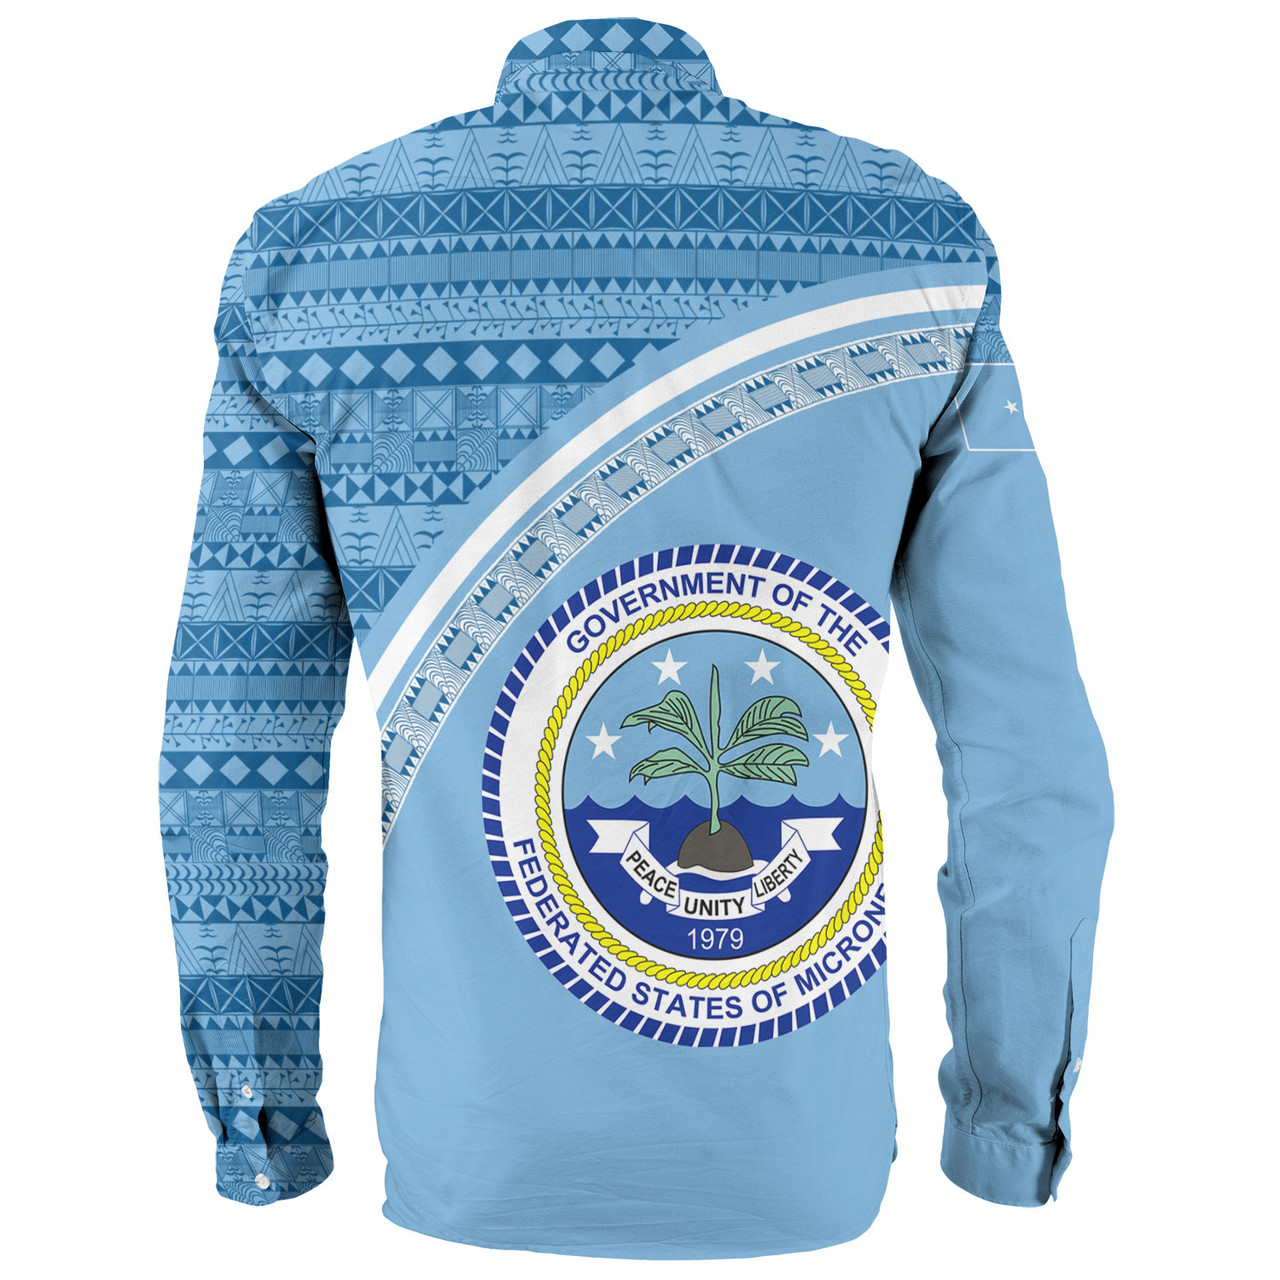 Federated States Of Micronesia Custom Personalised Long Sleeve Shirt Micronesia Tribal Patterns Curve Style